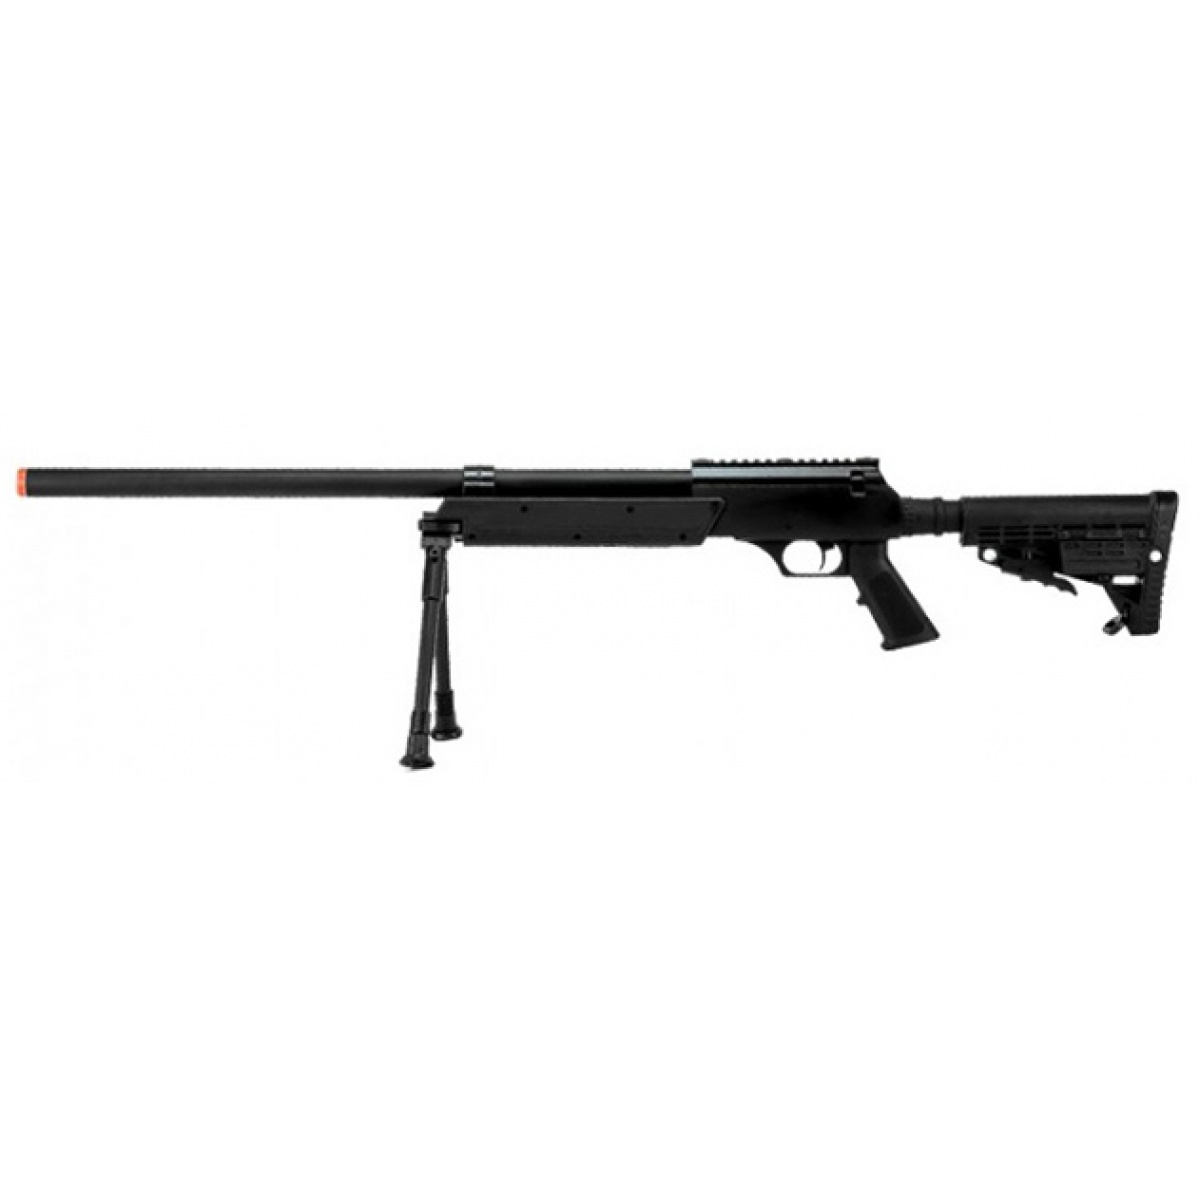 Echo1 ASR Bolt Action Airsoft Sniper Rifle w/ Quick Release Bipod